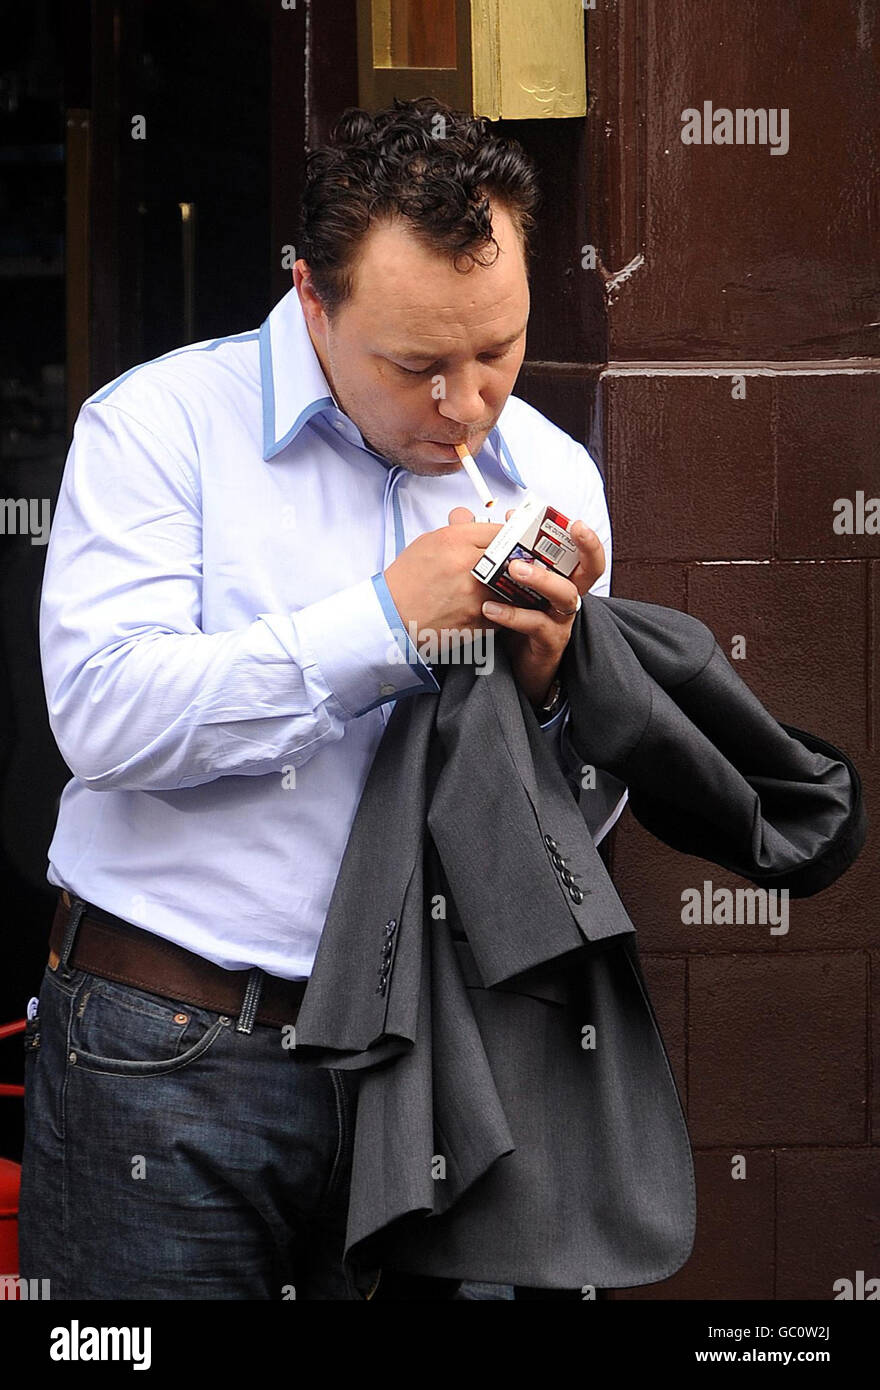 Stephen Graham smoking a cigarette (or weed)
